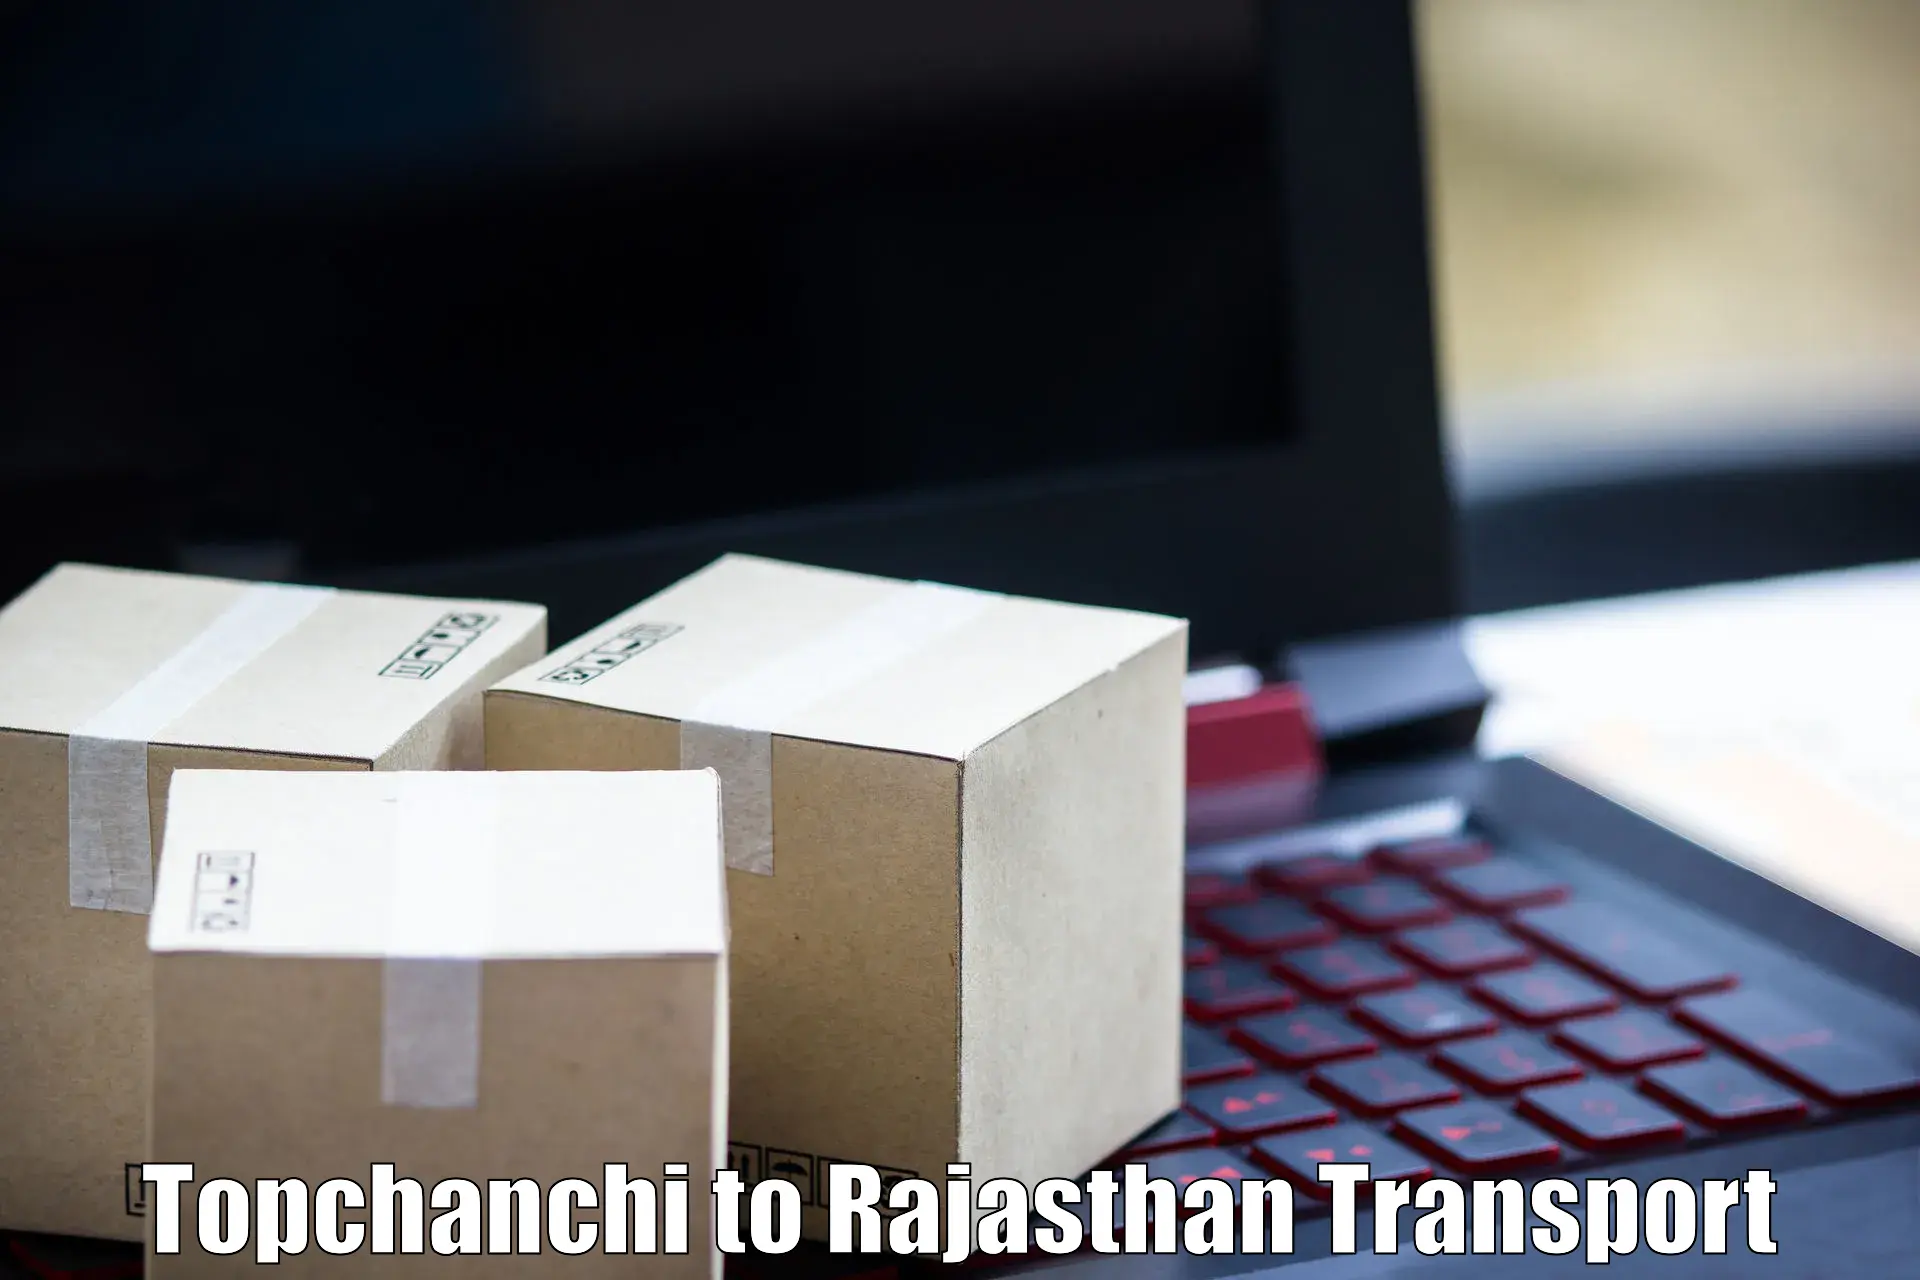 Nearby transport service Topchanchi to Udaipur